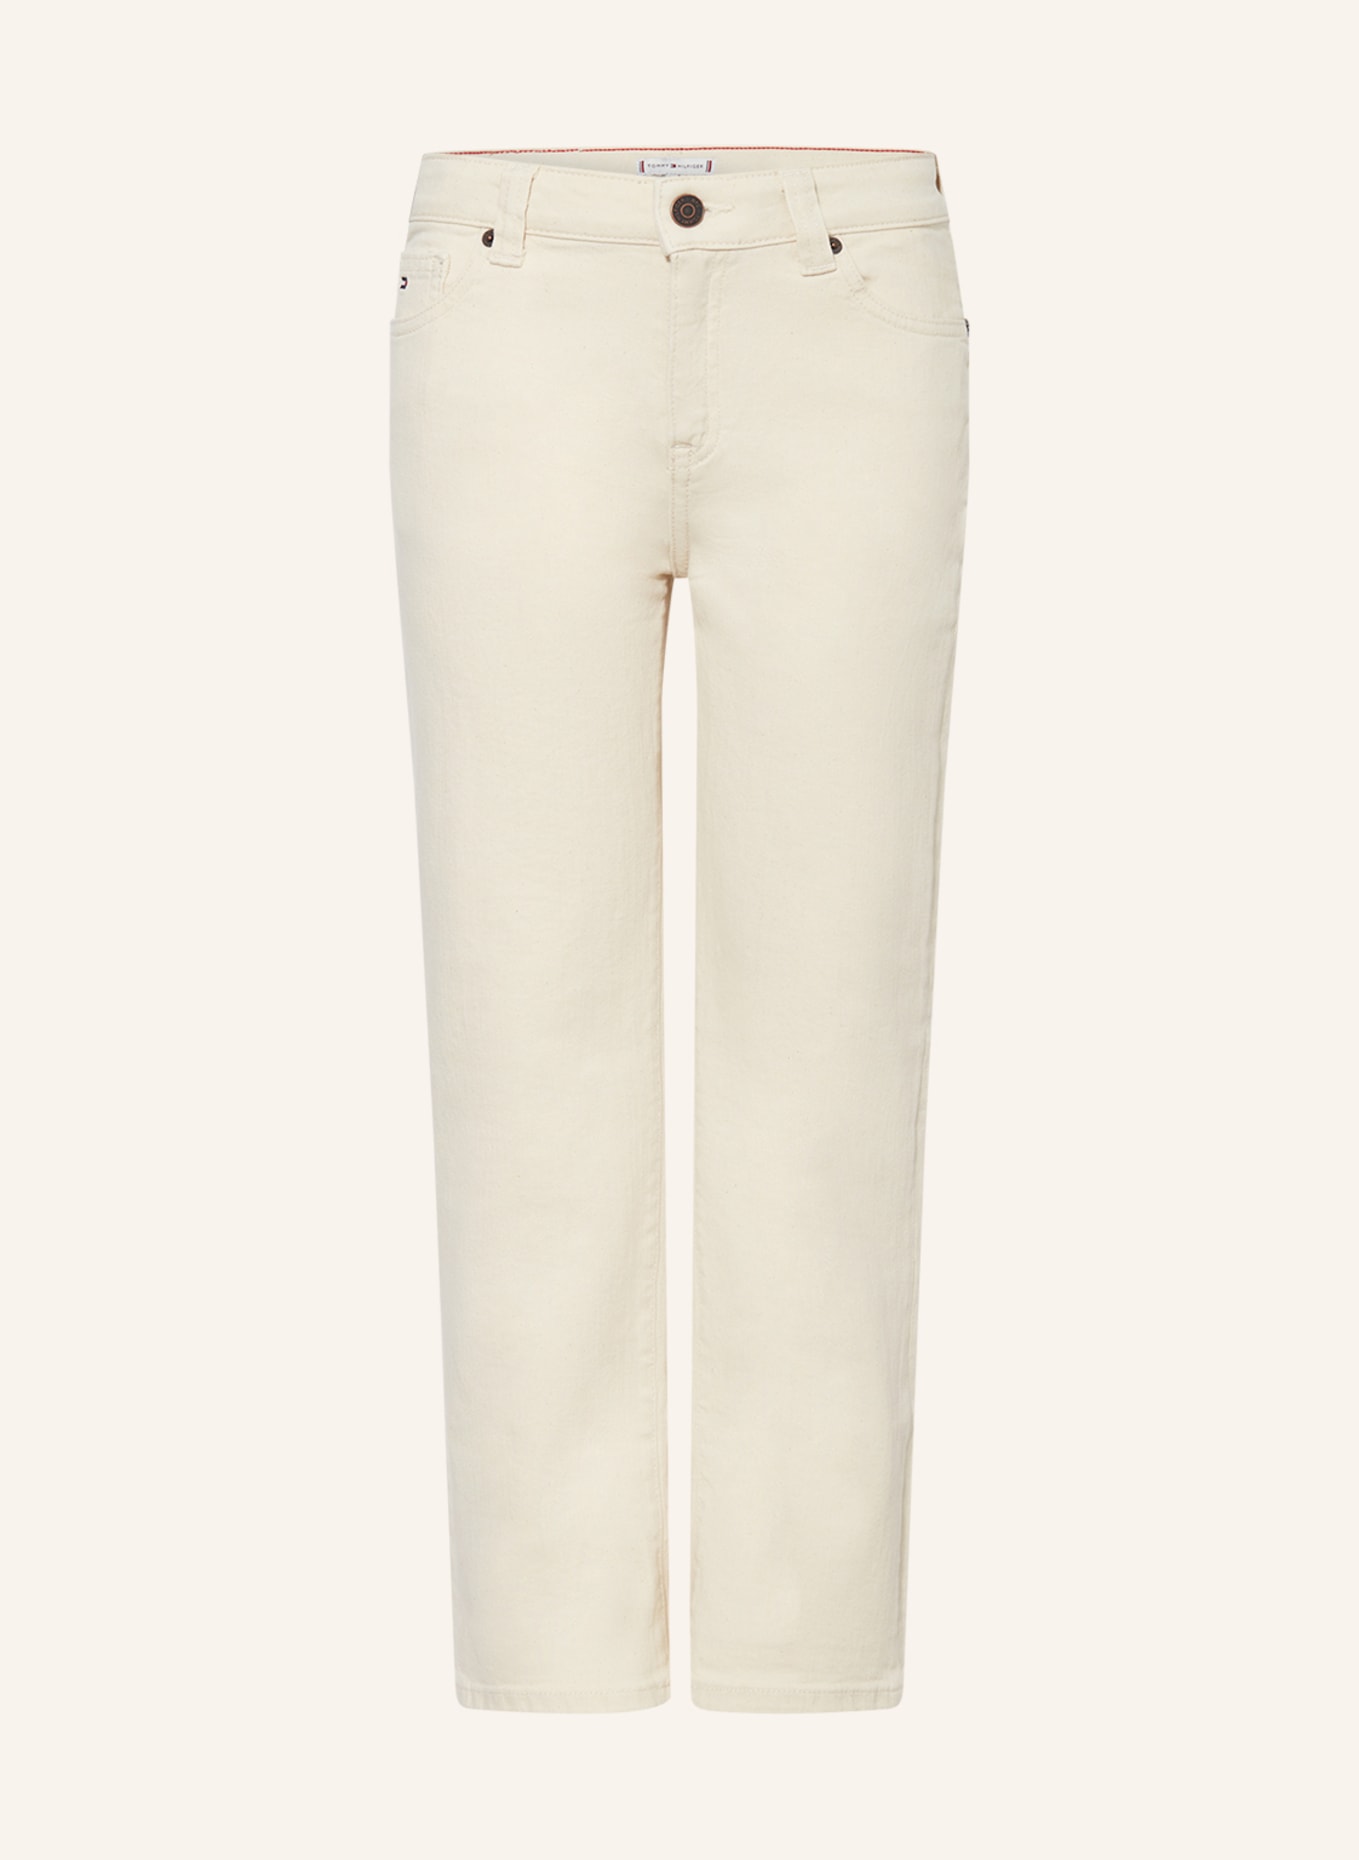 TOMMY HILFIGER Jeans GIRLFRIEND CALICO Straight Fit, Farbe: WEISS (Bild 1)